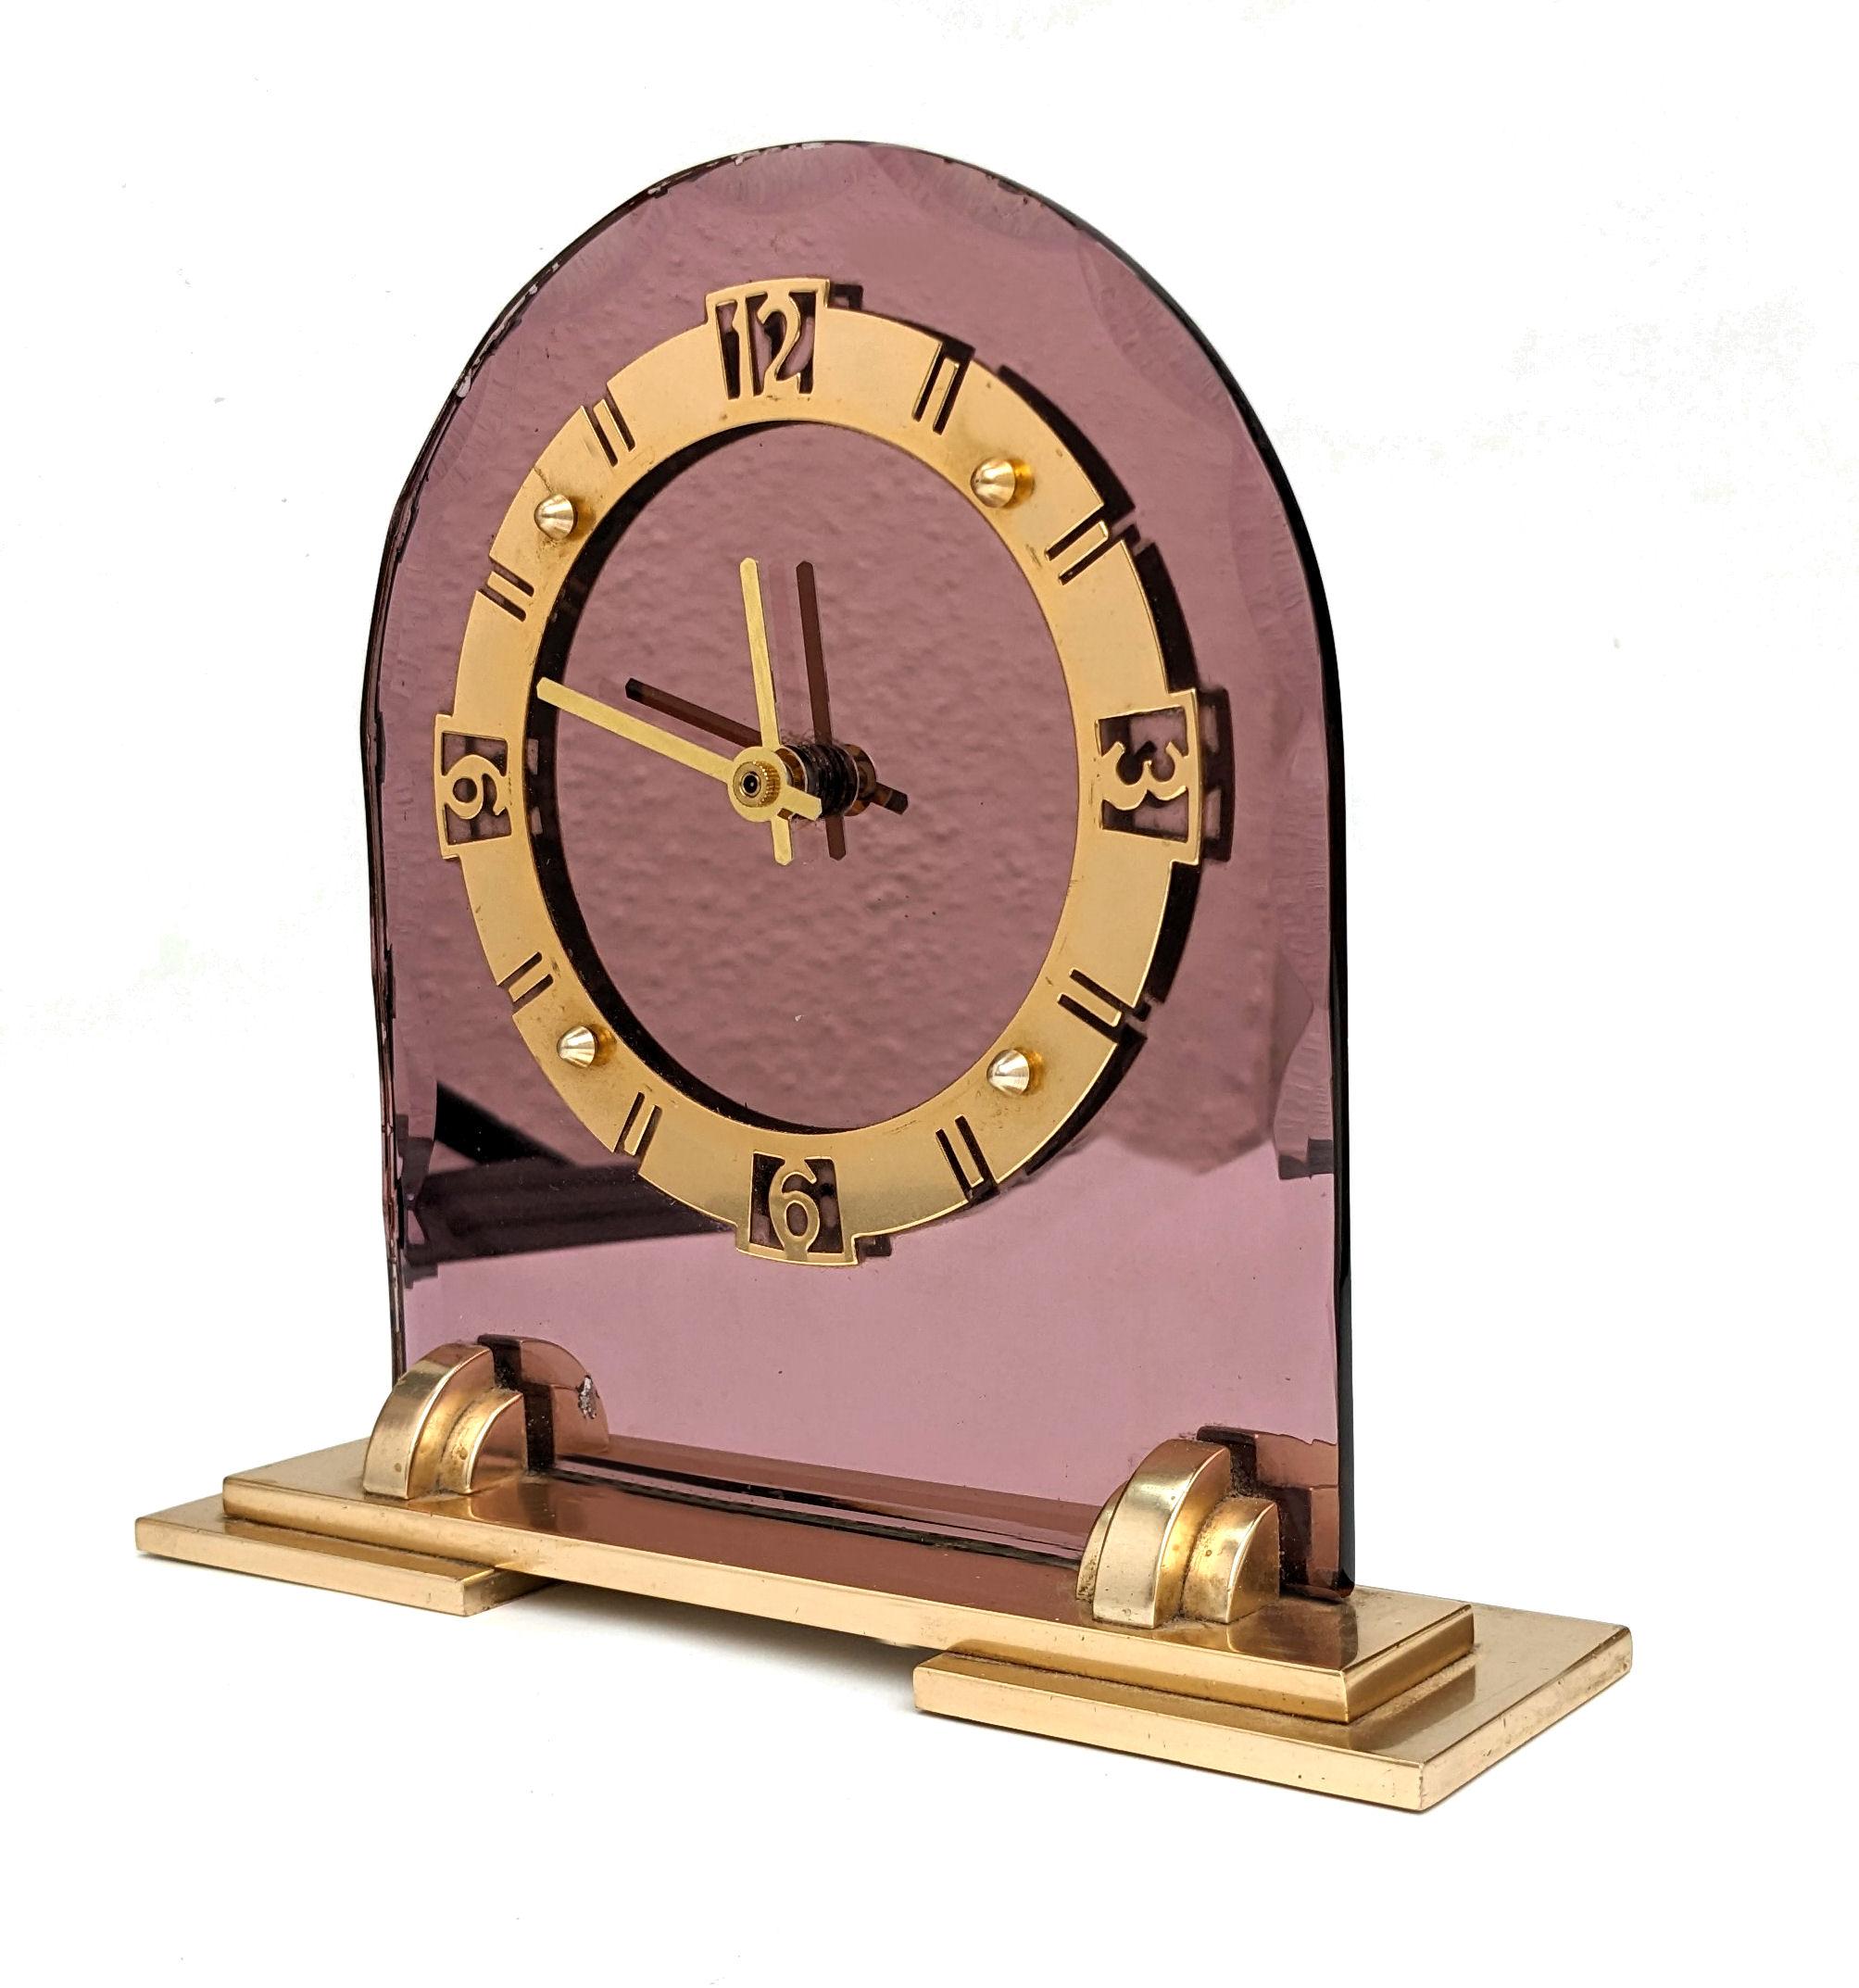 For your consideration is this Rose glass mirror Art Deco Clock. Lovely condition for it's age is this totally authentic 1930s Art Deco style mirror clock which originates from England. Made by Smith's English Clocks Ltd of London, and converted